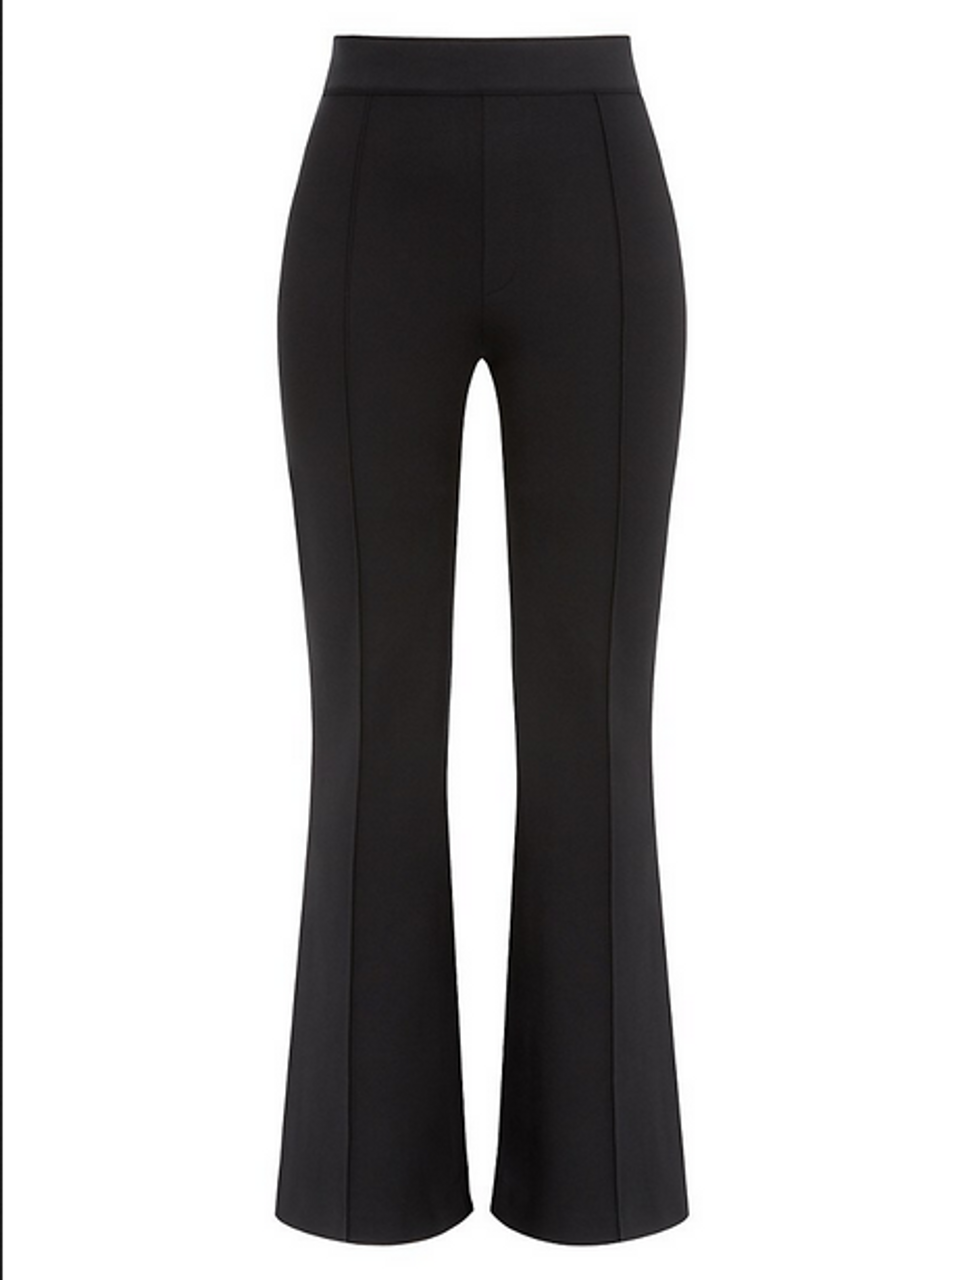 Spanx The Perfect Pant Hi-Rise Flared Trousers, Classic Black at